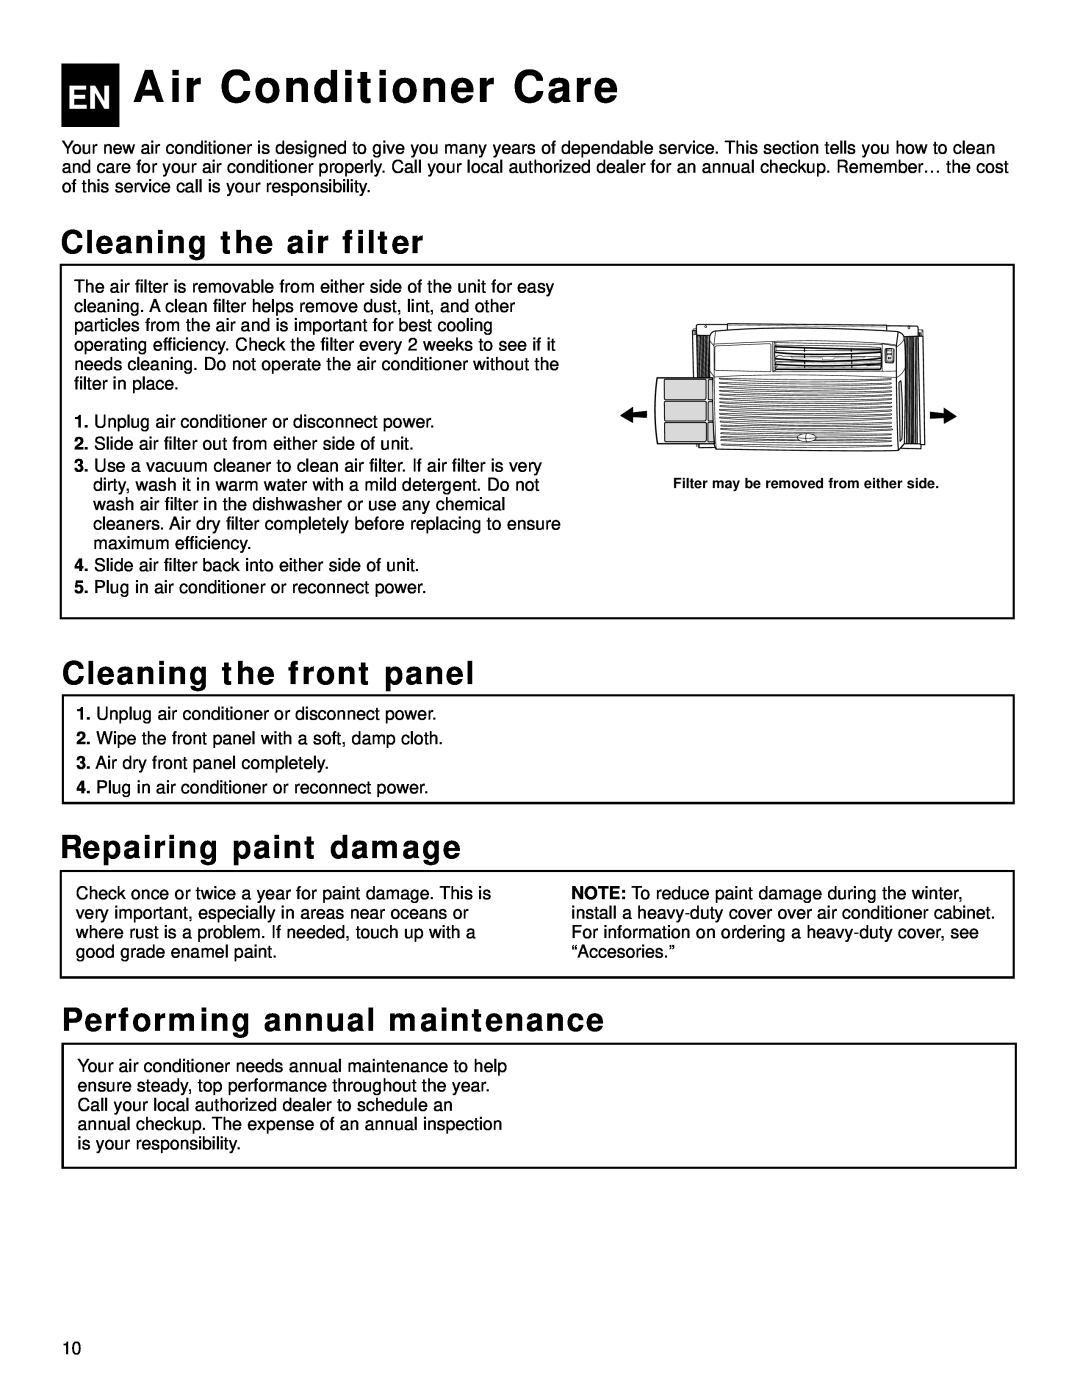 Whirlpool ACQ058MM0 EN Air Conditioner Care, Cleaning the air filter, Cleaning the front panel, Repairing paint damage 